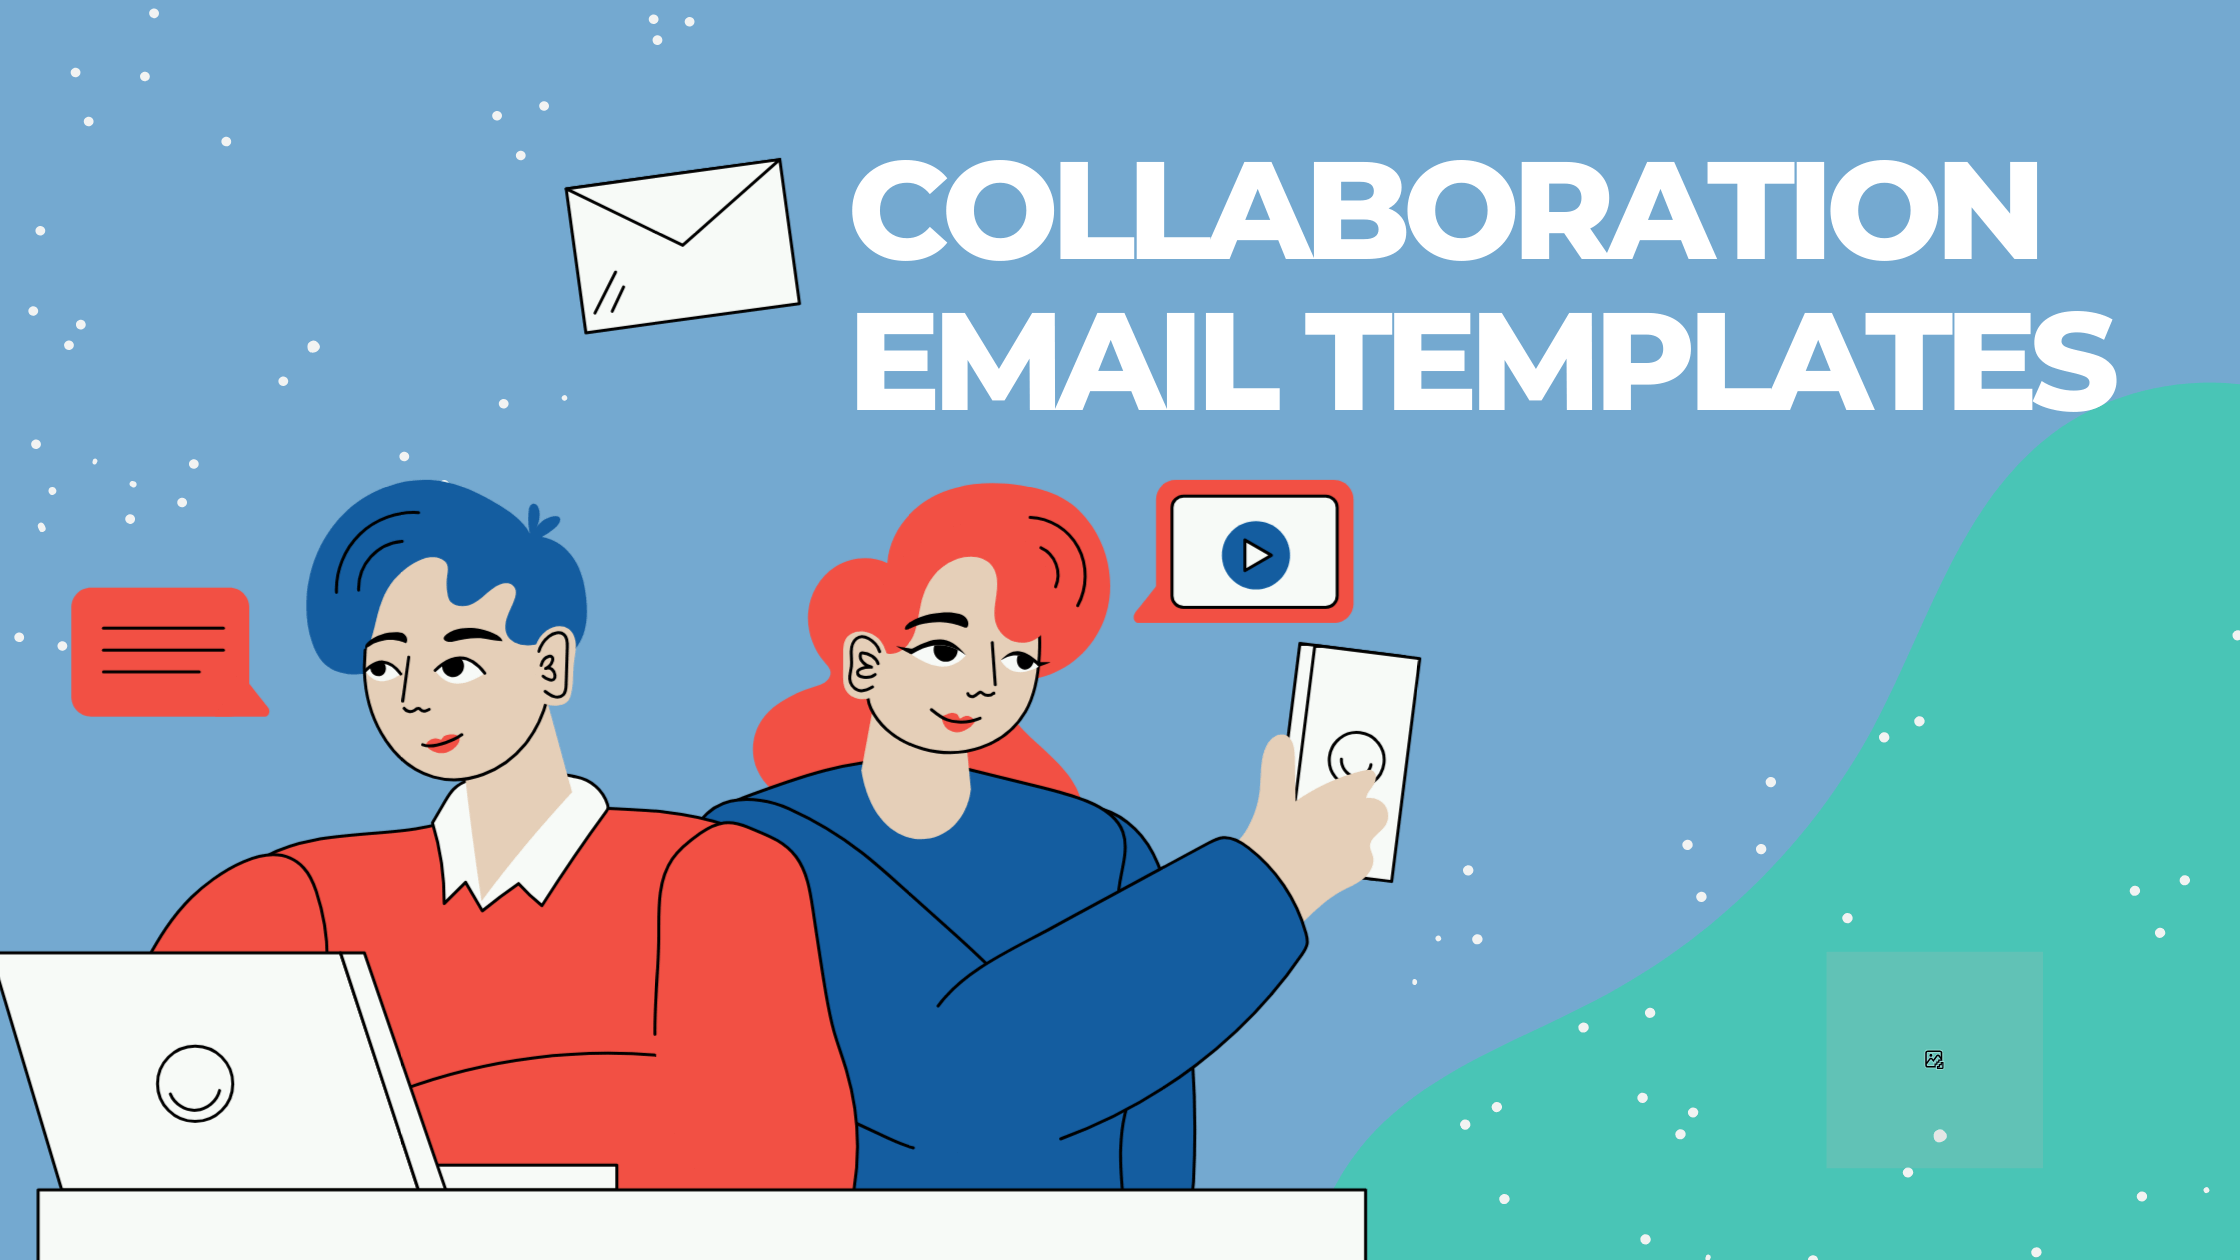 Collaboration Email Templates: A Guide to Crafting Compelling Pitches